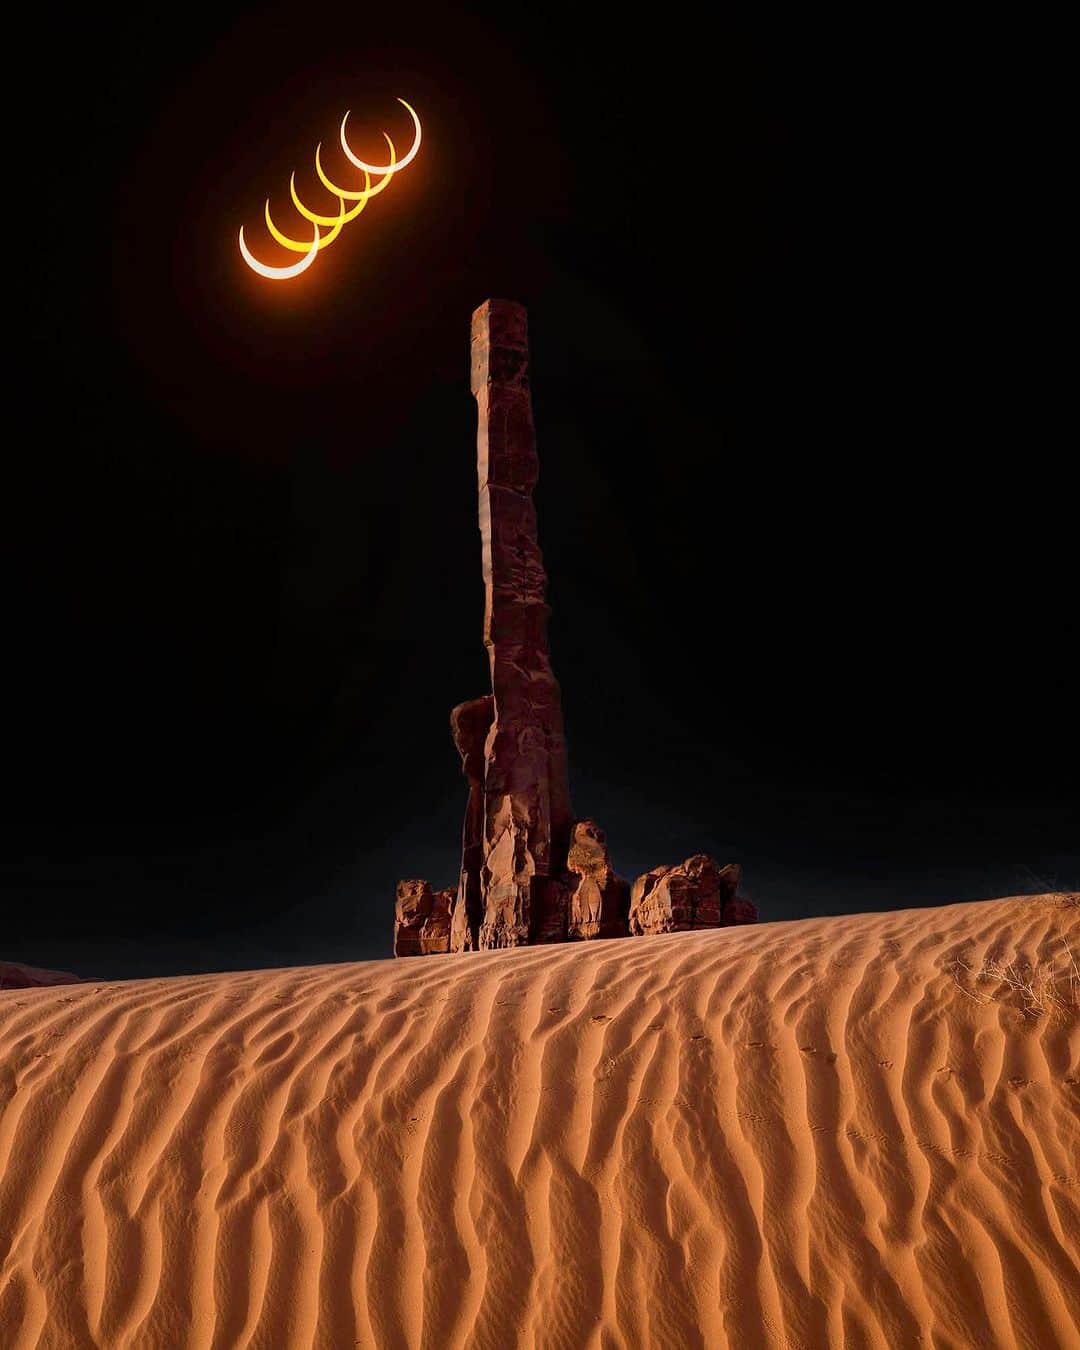 Ricoh Imagingのインスタグラム：「Annular eclipse of October 14, 2023. These eclipse composites will upset landscape purists, but I will note that all the eclipse images in the sky were taken above these very same sandstone spires, the ‘Totem Poles’ or Yei Be Chi of Monument Valley, Arizona. The landforms were shot in earlier years. I created these composites in the spirit of cosmic surrealism and documentary infidelity, and to freely play with elements of Nature. . . 📸: @kerrickjames5  Eclipse Images 📸: K-1 Mark II & K-3 Mark III Lenses: #pentax_dfa70210 #pentax_da1650plm . . #pentax  #pentax  #pentaxian #ricoh #ricohimaging  #lifeonthewater #pentaxphotography #pentax #shootpentax #Arizona  #moon #eclipse #moonlovers #ricohpentax #pentax70210 #pentaxk1mkii #pentaxians #teampentax」